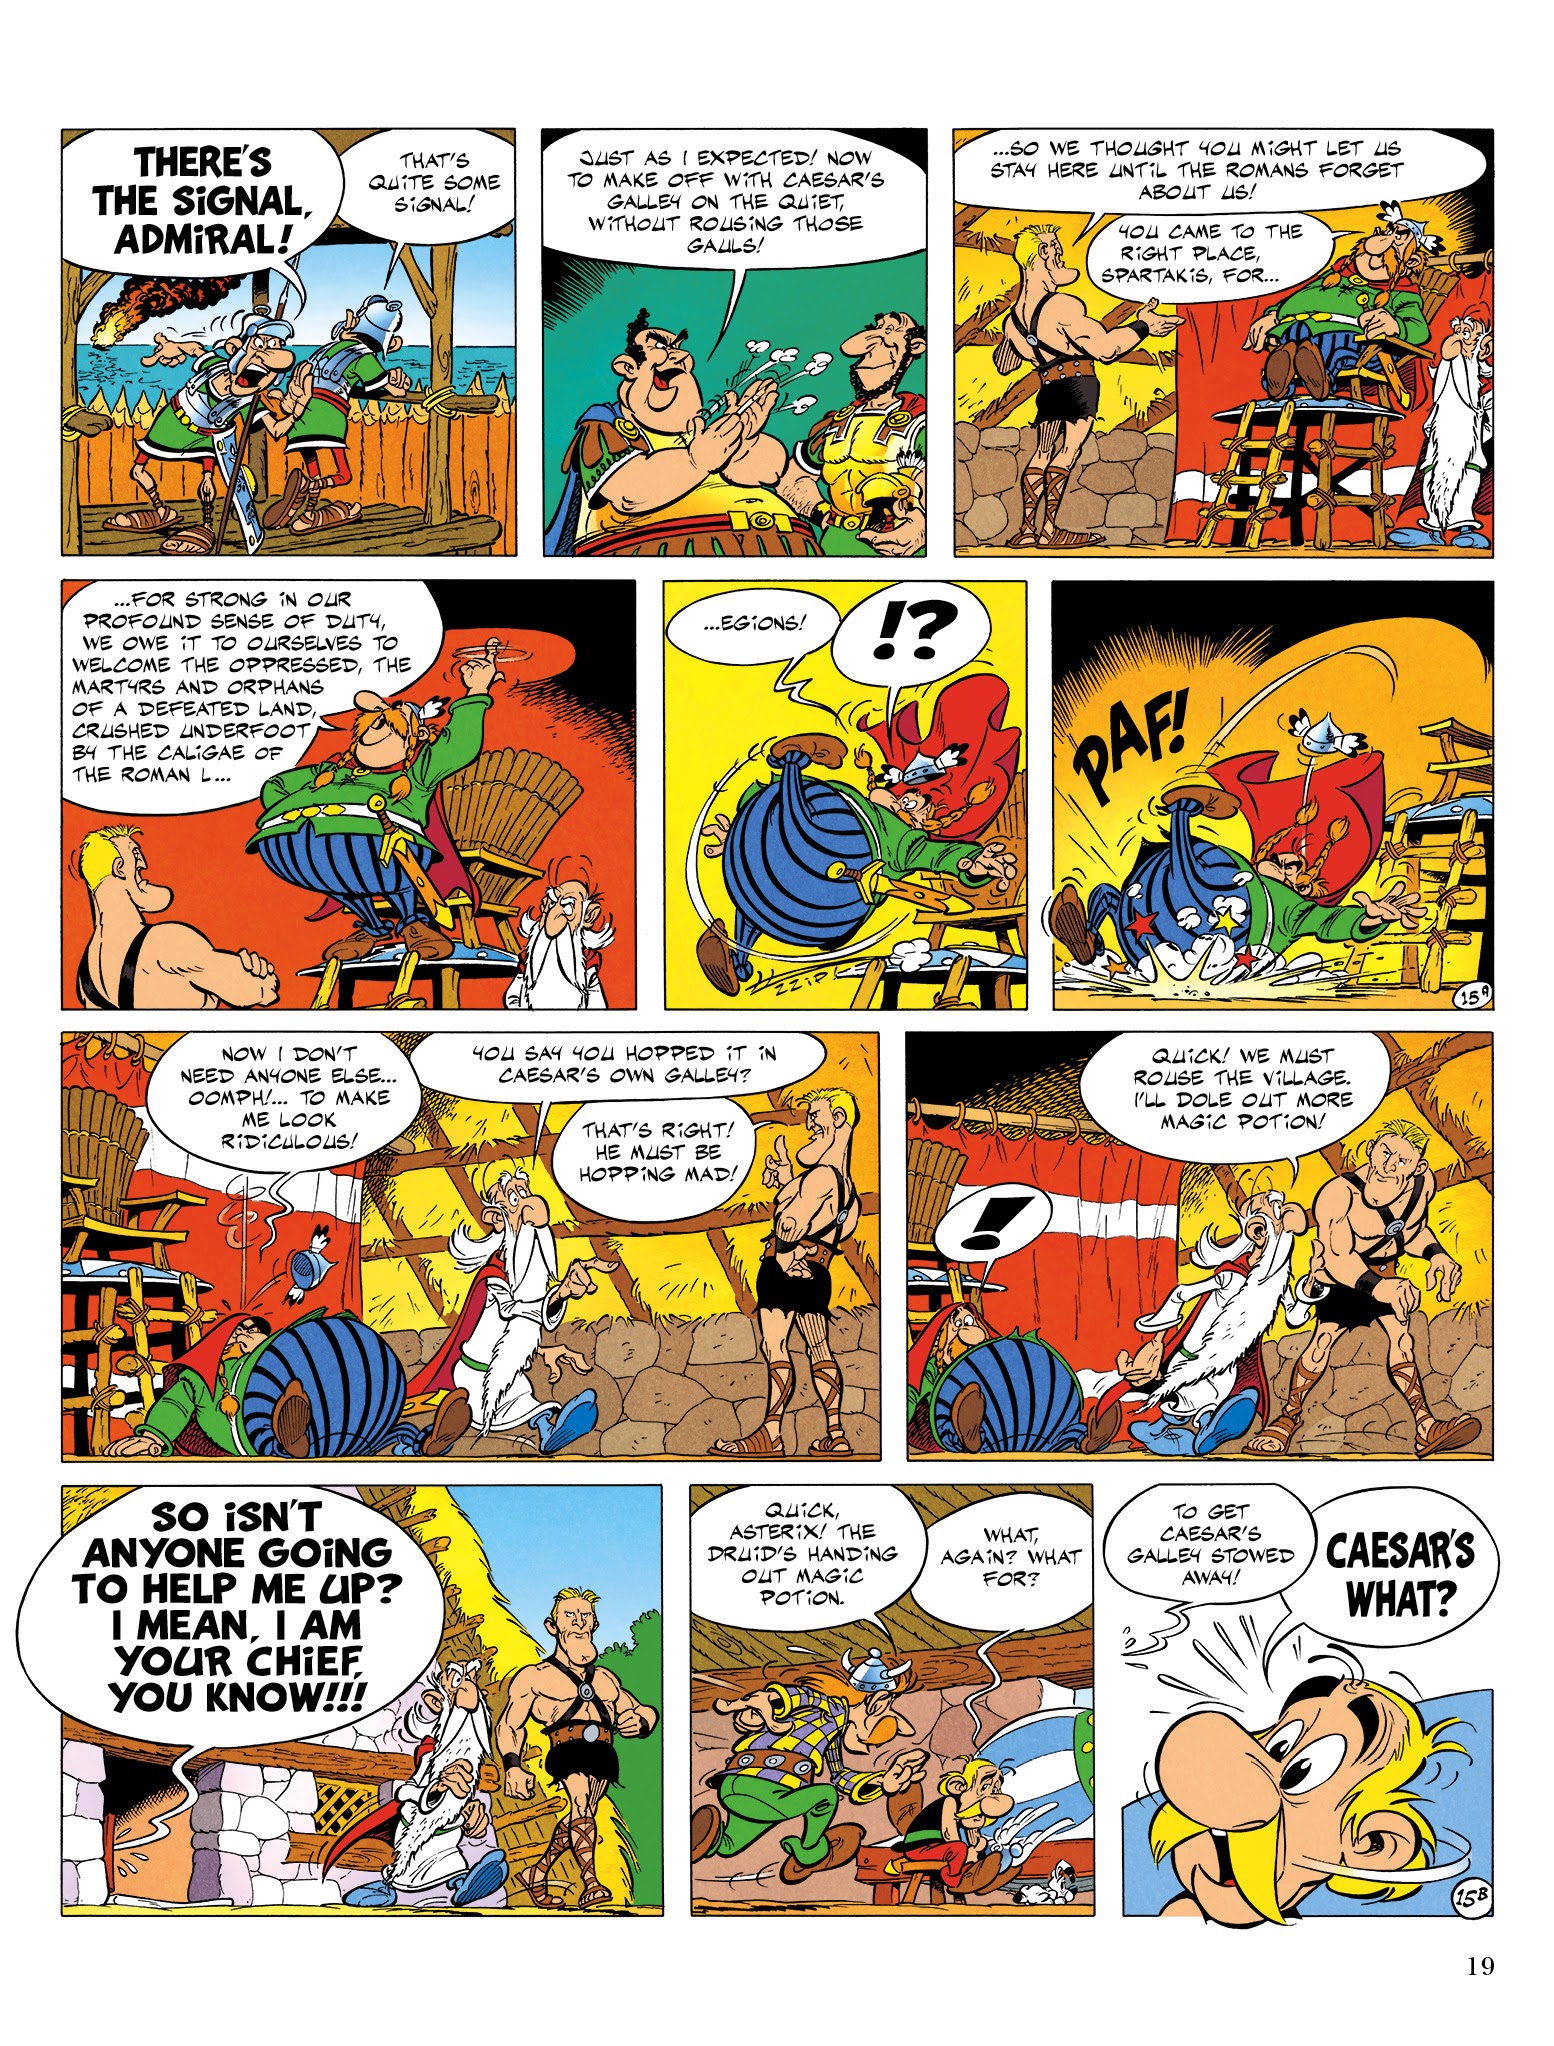 Read online Asterix comic -  Issue #30 - 20